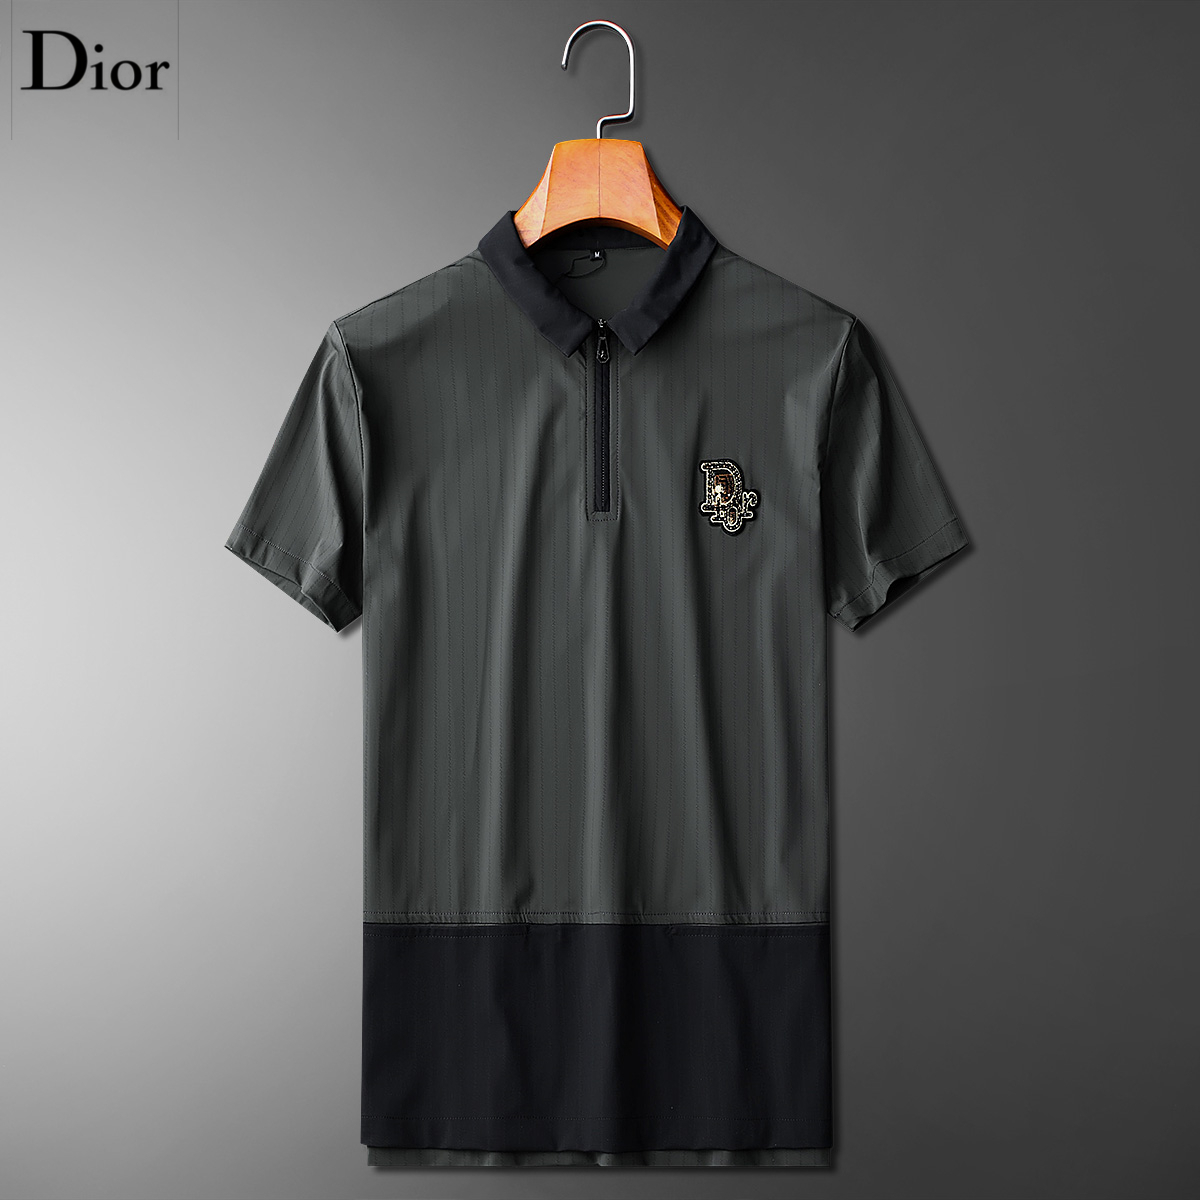 Christian Dior Tracksuits Short Sleeved Polo For Men #771384 $79.54 ...